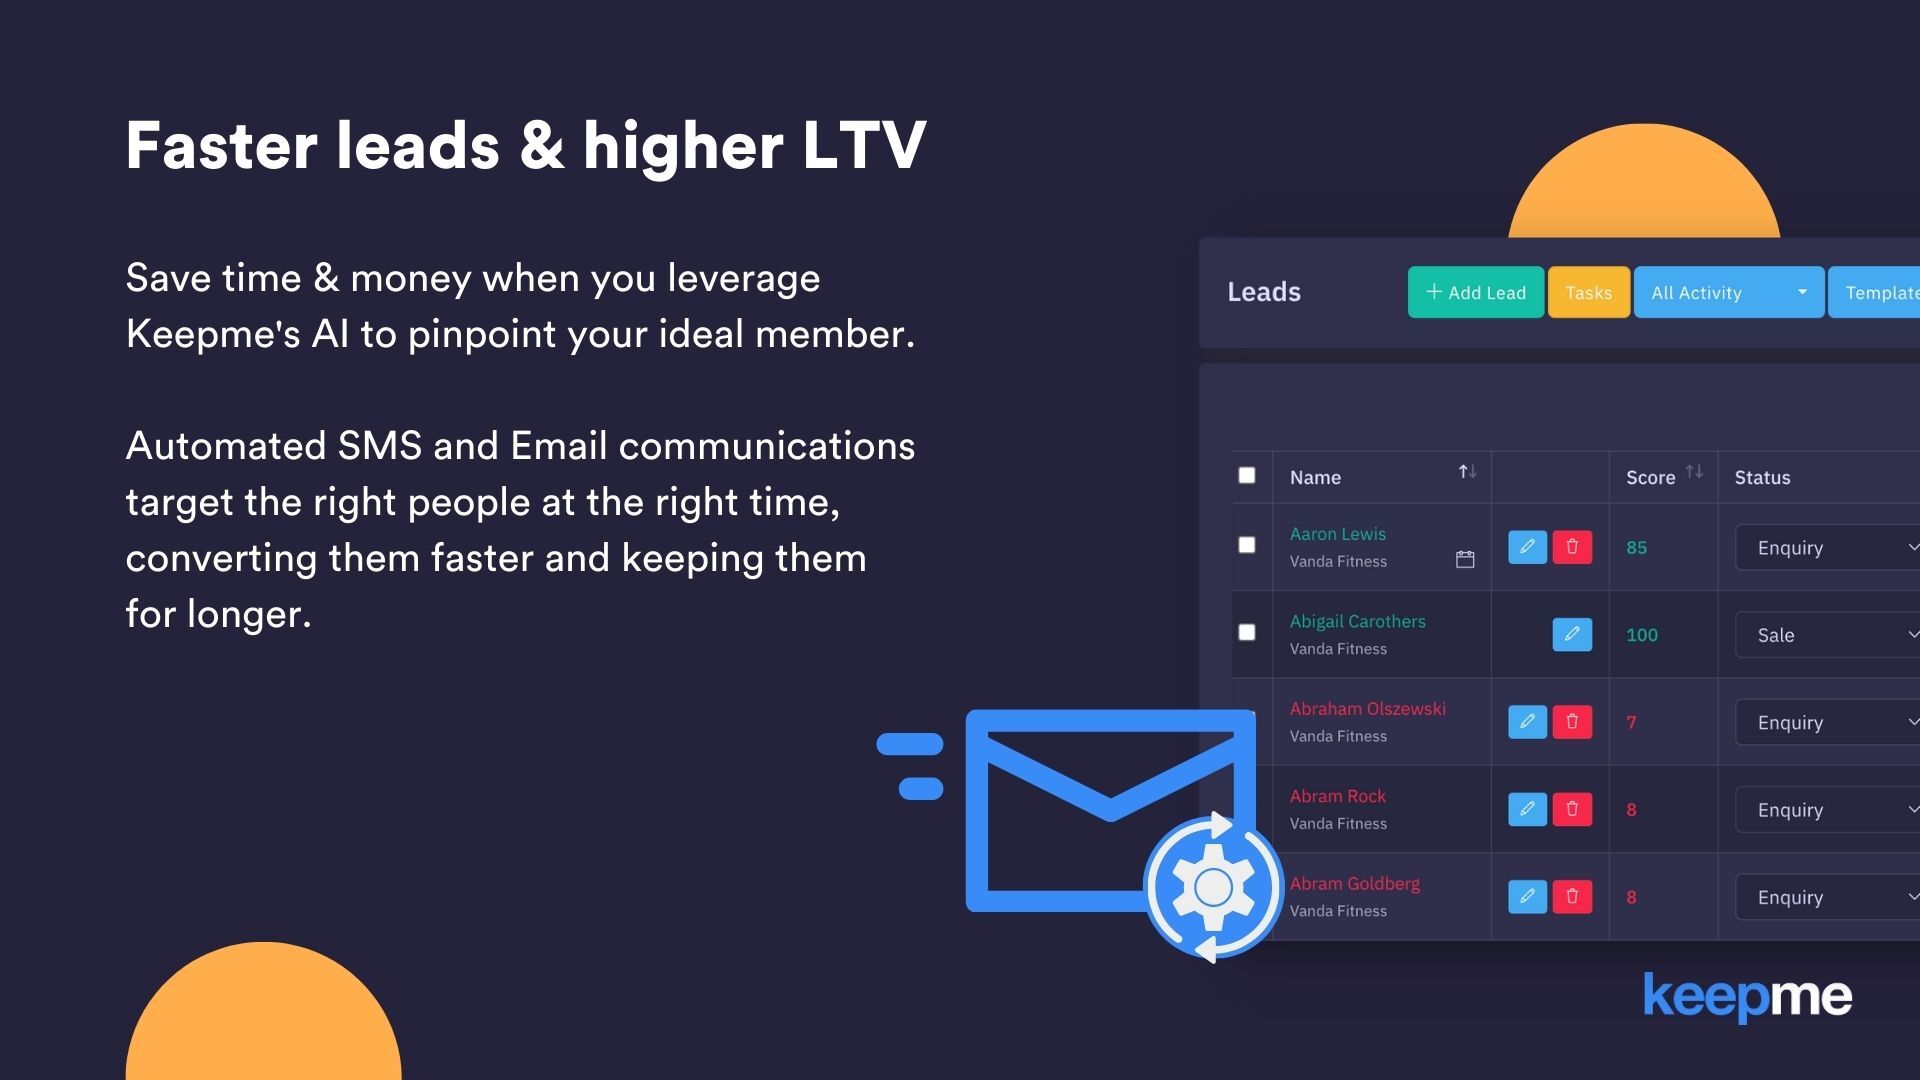 Faster leads & higher LTV